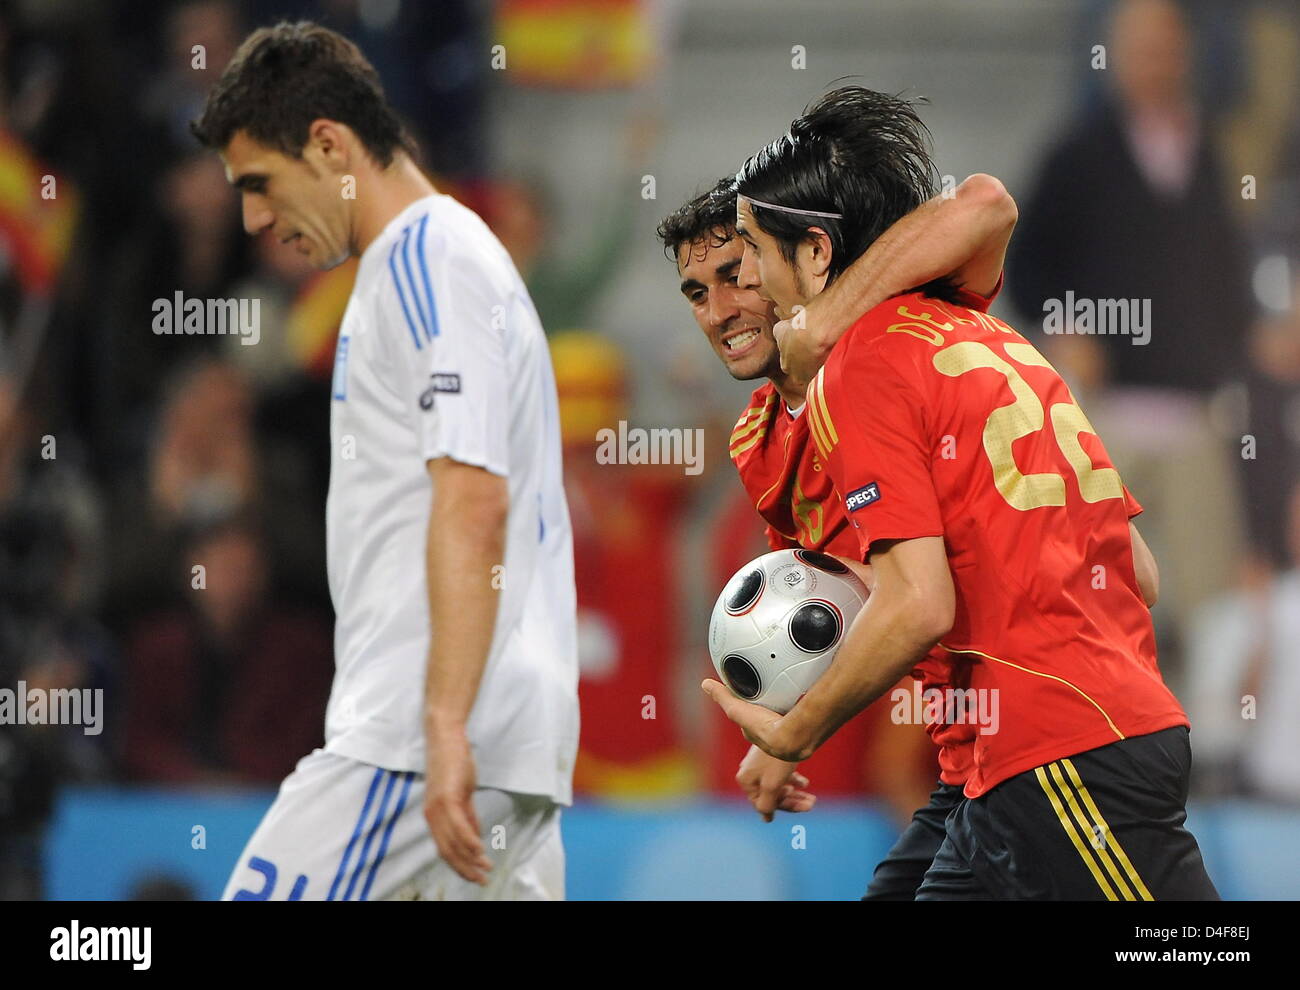 Ruben de la Red (R) and Alvaro Arbeloa (C) of Spain jubilate after the 1-1 goal next to Kostas Katsouranis (L) of Greece during the UEFA EURO 2008 Group D preliminary round match between Greece and Spain at the Walz-Siezenheim stadium in Salzburg, Austria, 18 June 2008. Photo: Achim Scheidemann dpa +please note UEFA restrictions particulary in regard to slide shows and 'No Mobile S Stock Photo